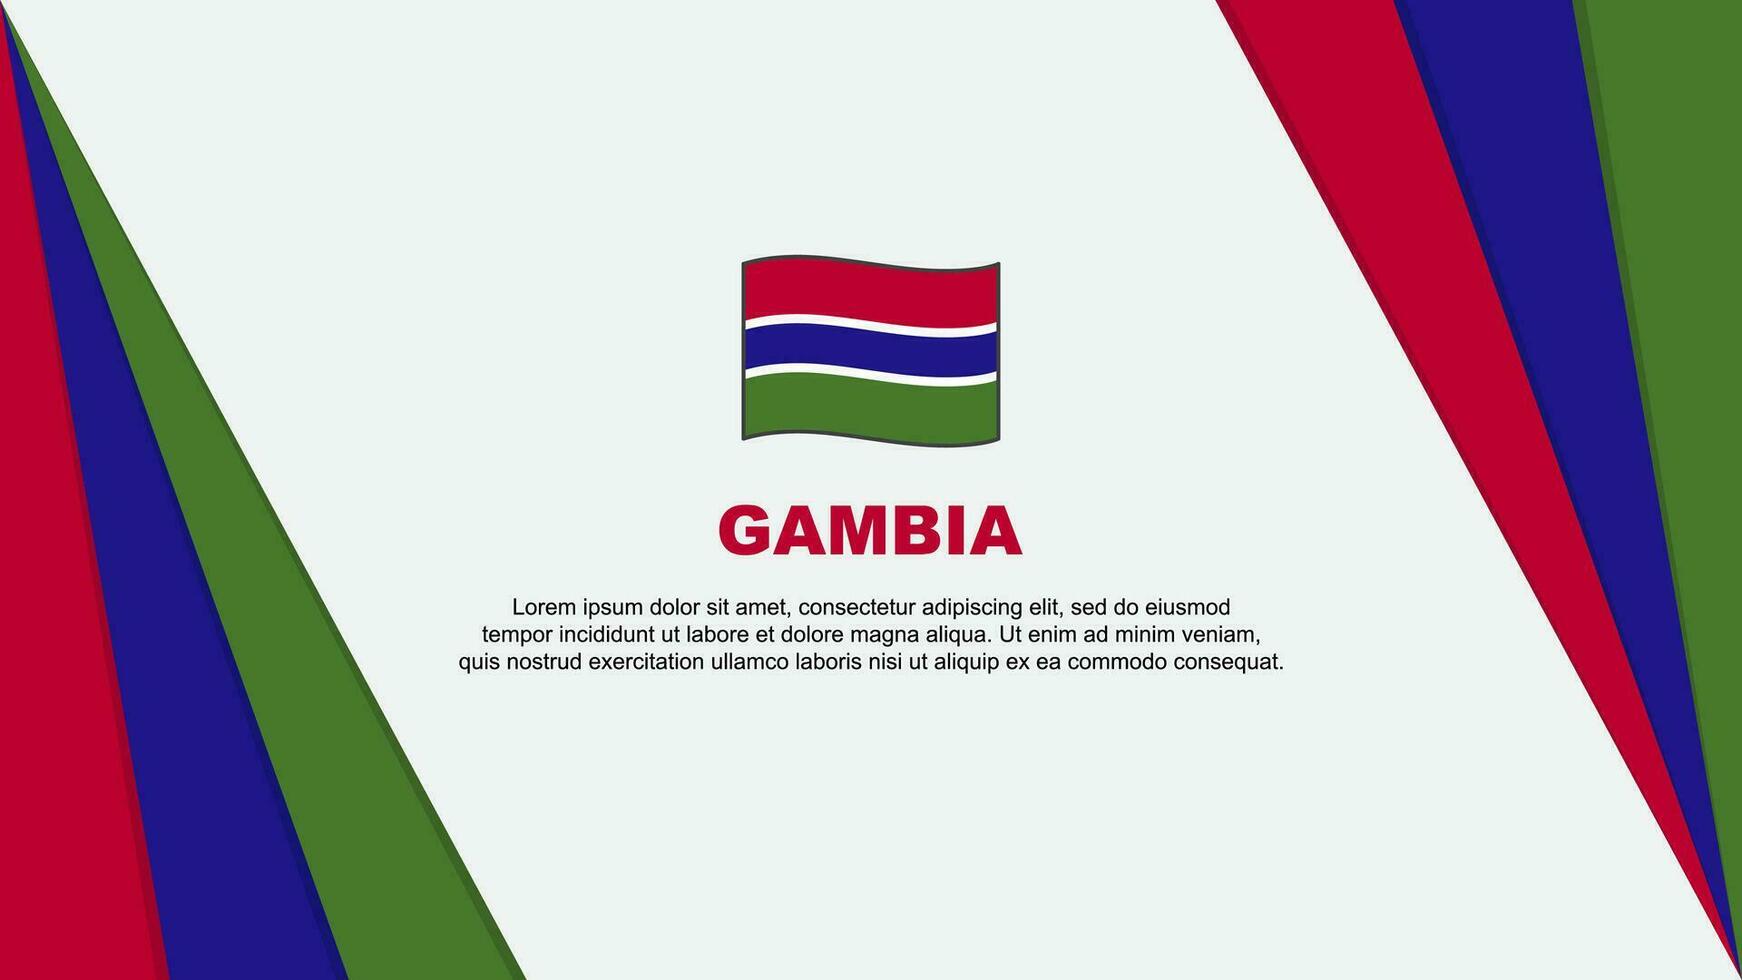 Gambia Flag Abstract Background Design Template. Gambia Independence Day Banner Cartoon Vector Illustration. Gambia Flag